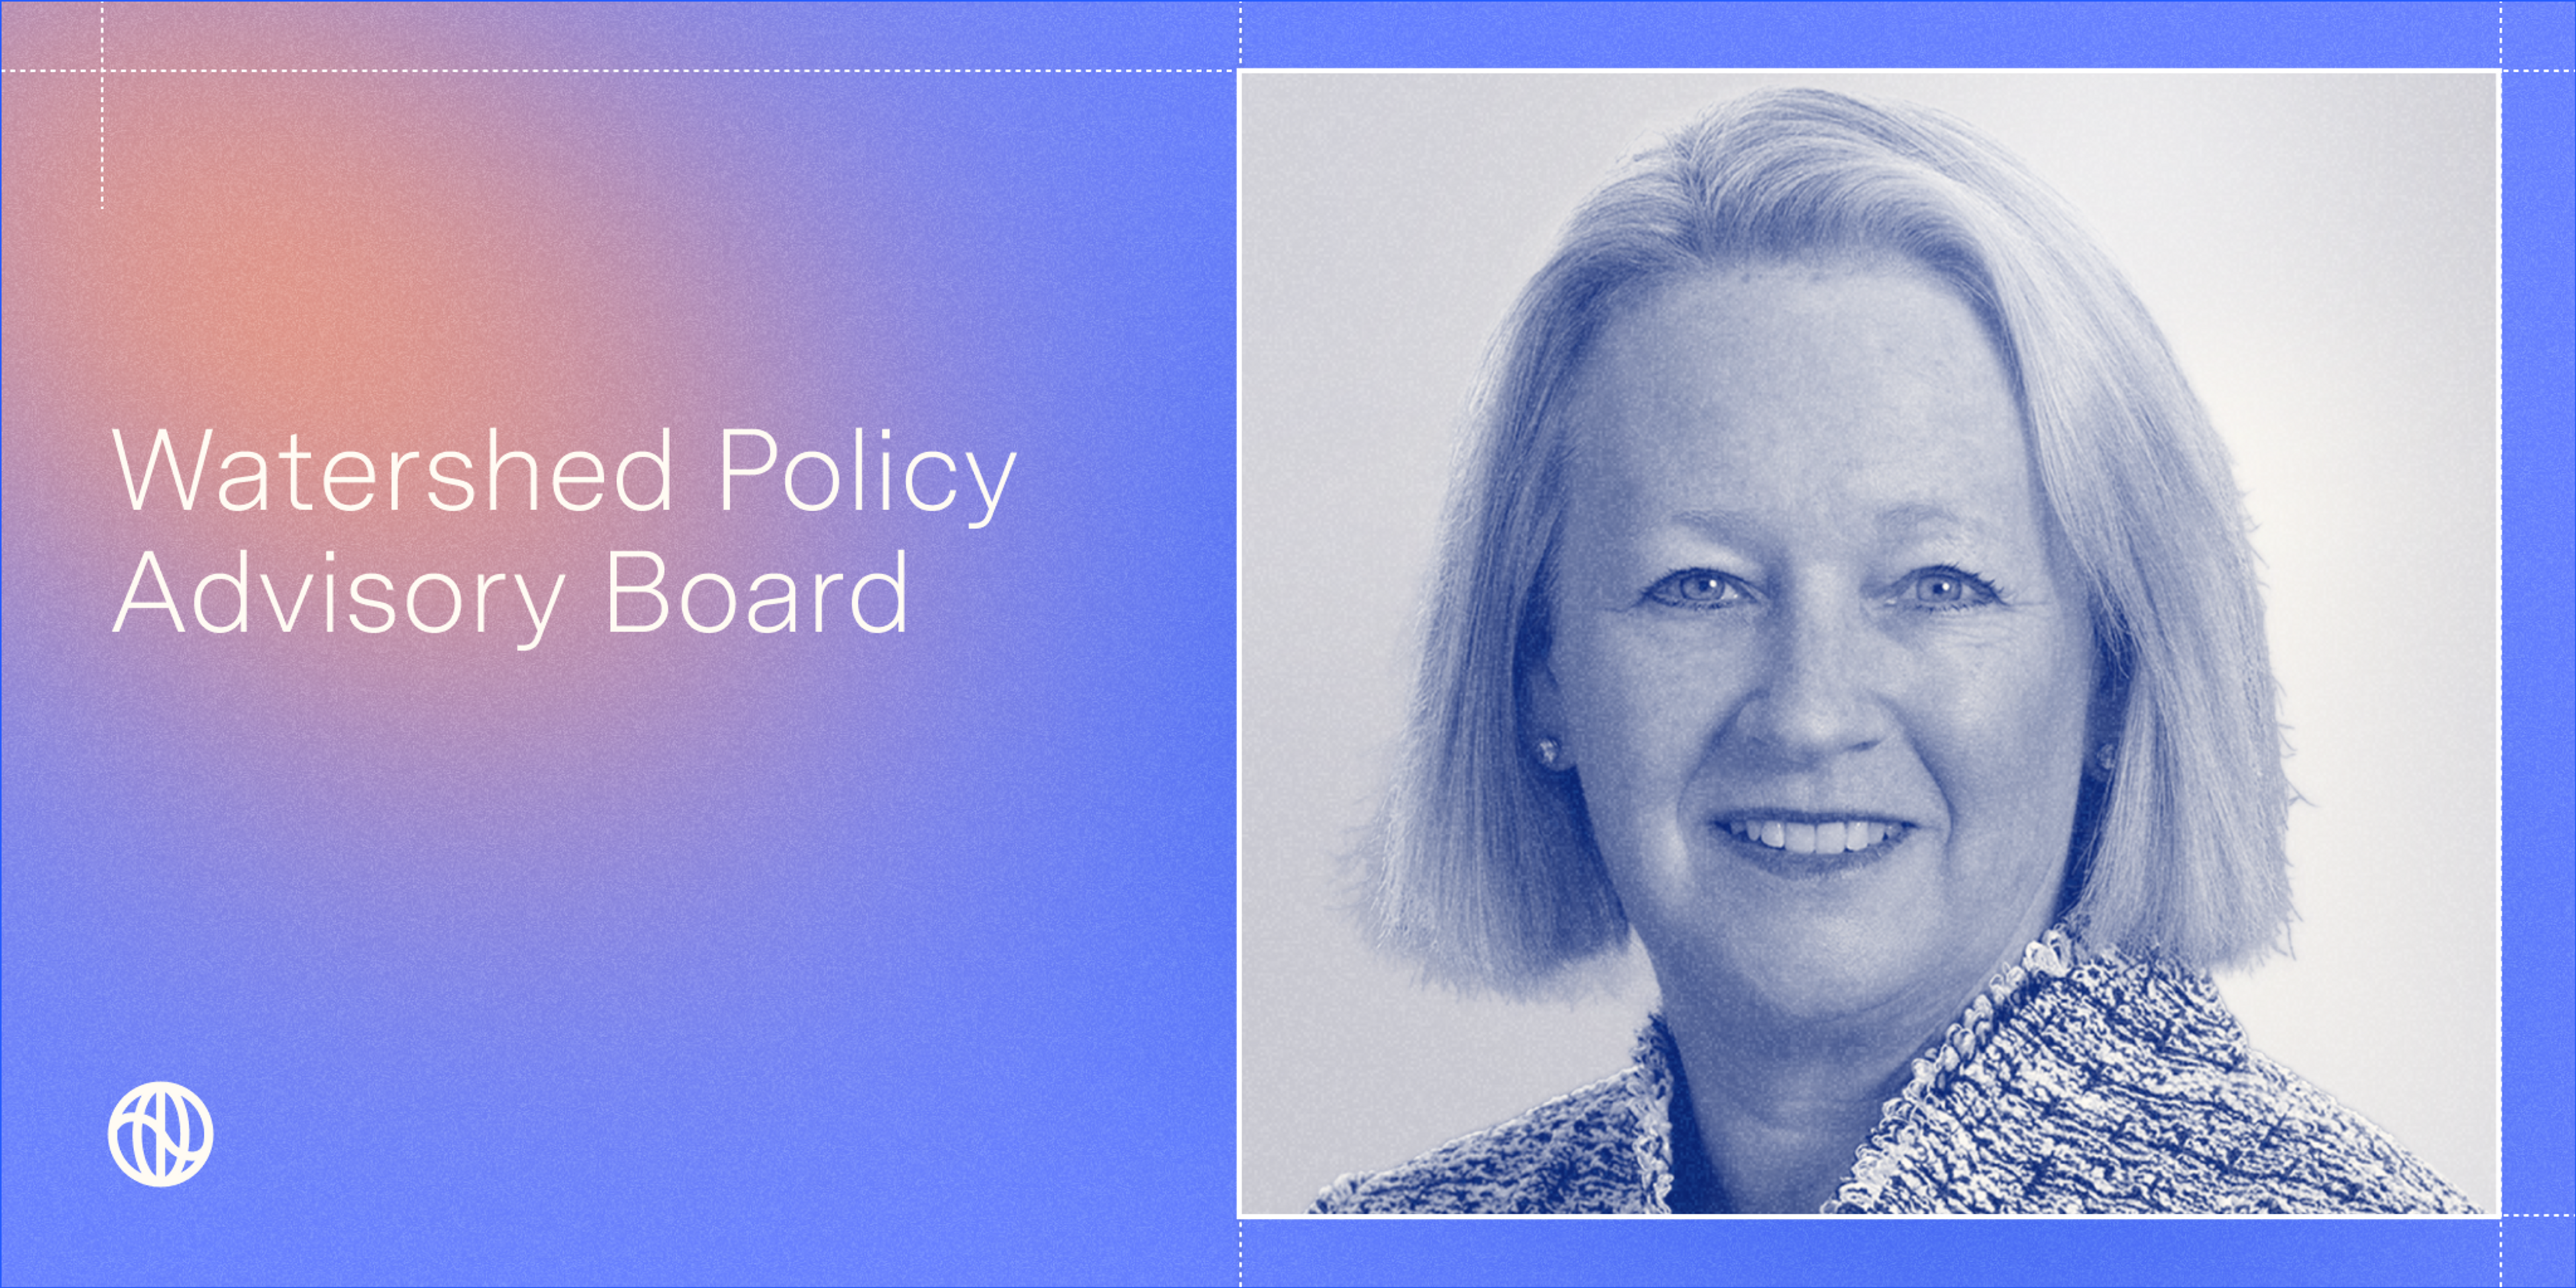 Welcoming Mary Schapiro to the Watershed Policy Advisory Board